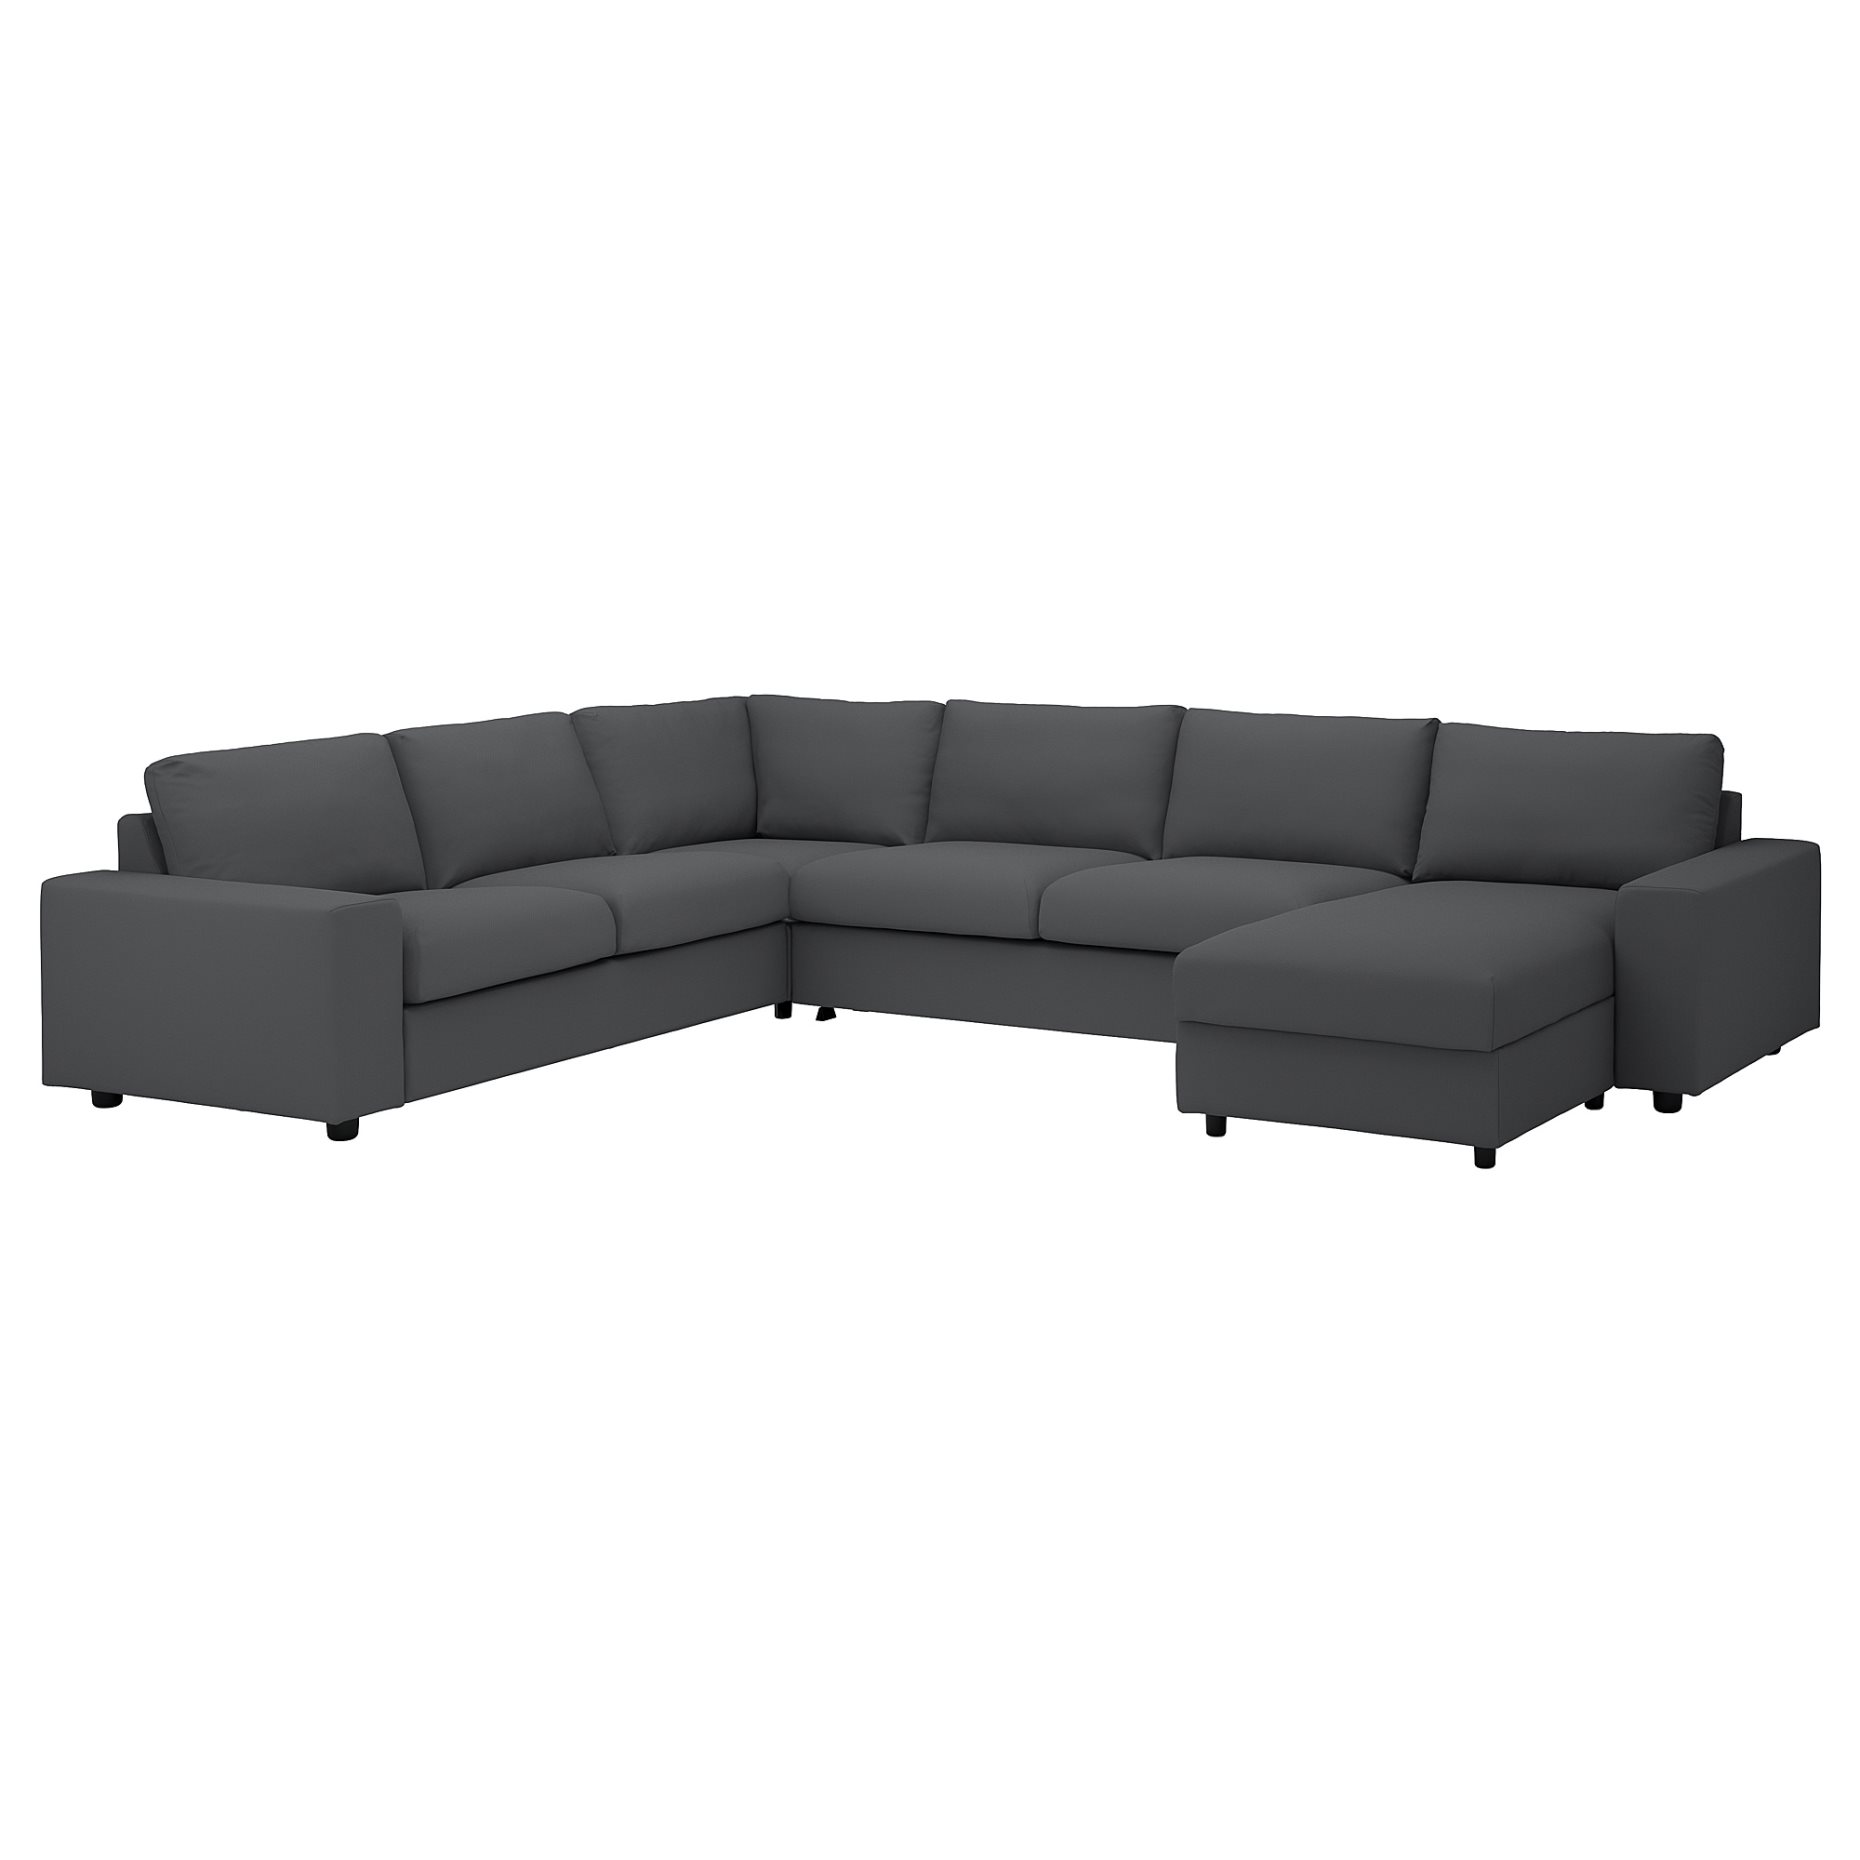 VIMLE, corner sofa-bed with wide armrests, 5-seat with chaise longue, 195.370.20